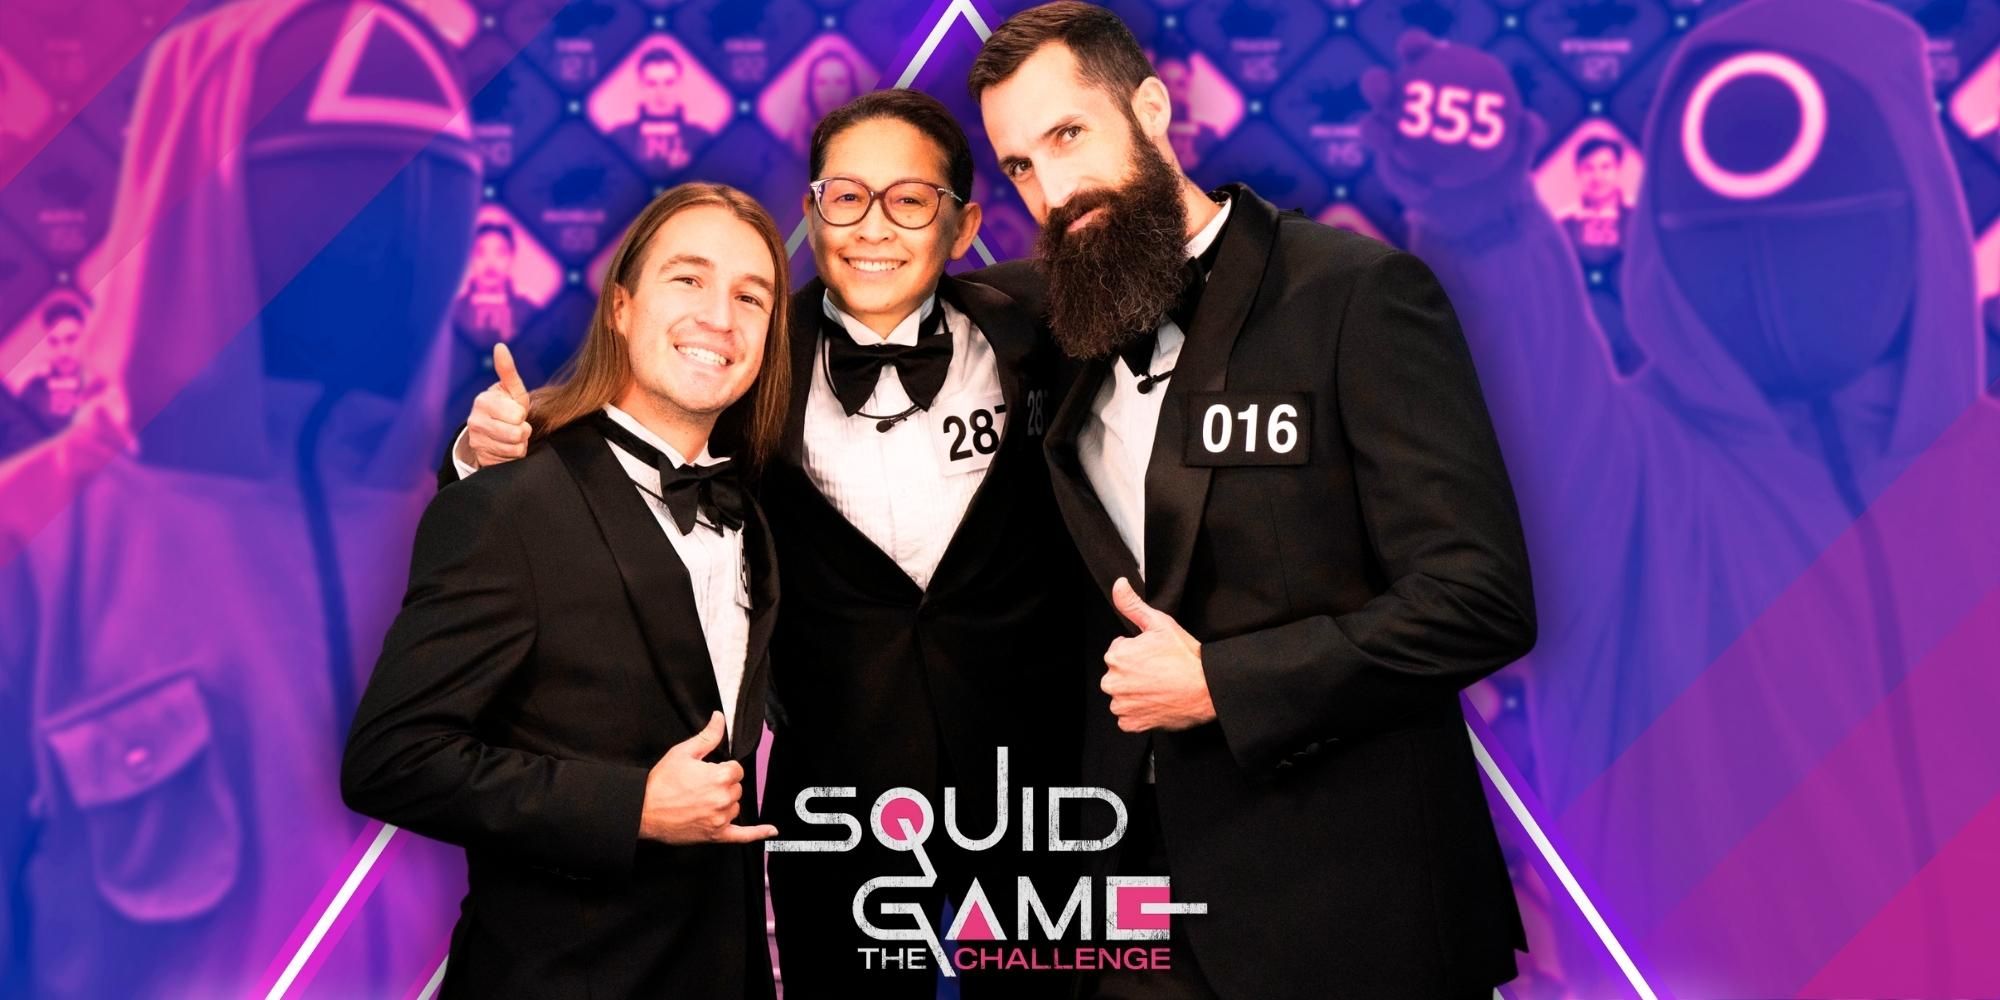 Image of players Sam (016), Phill (451), Mai (287) from Squid Game: The Challenge